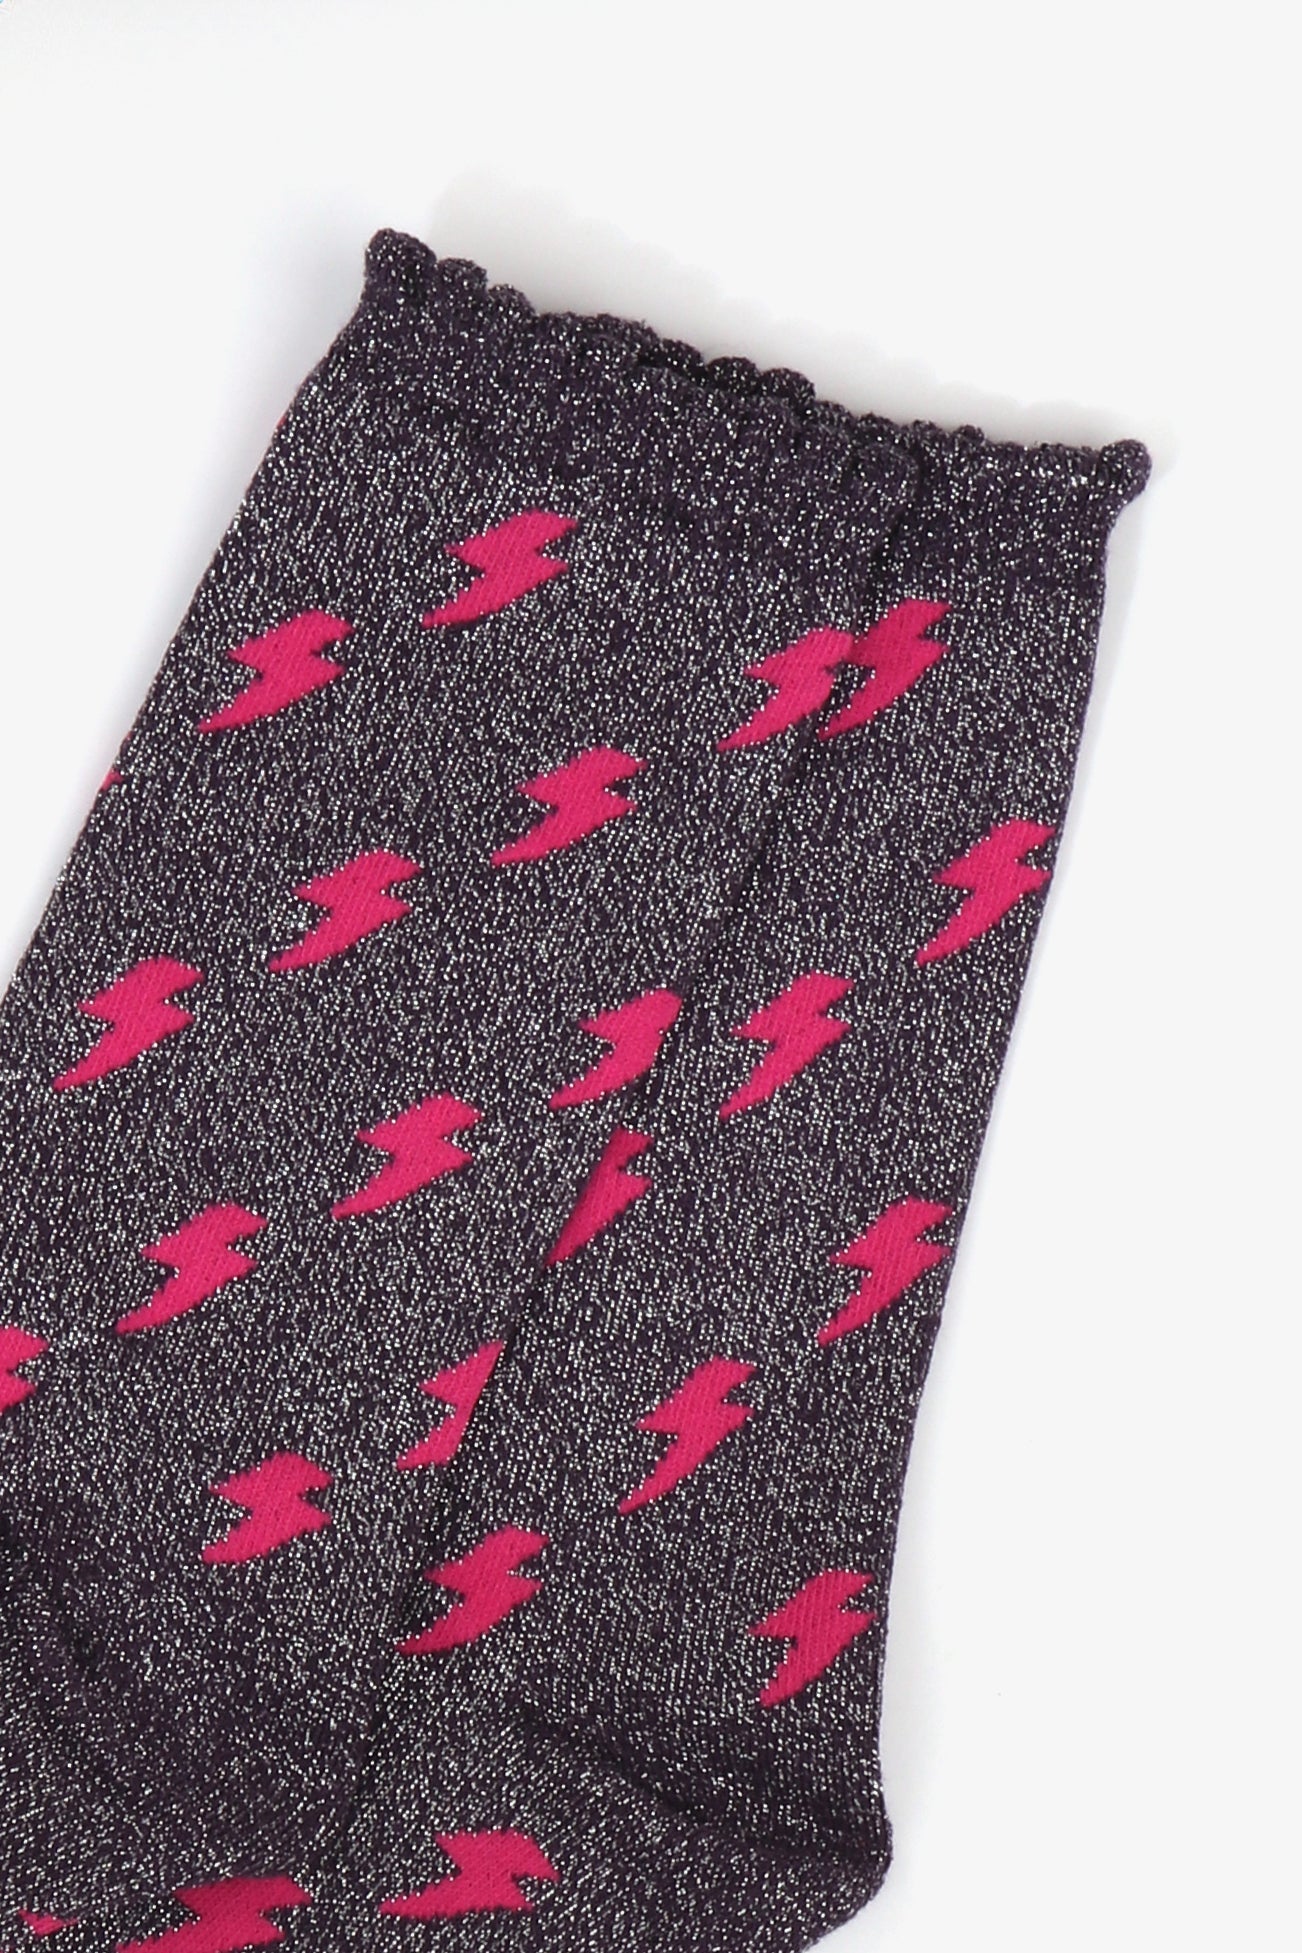 navy blue sparkly glitter socks with an all over pattern of pink lighting bolts